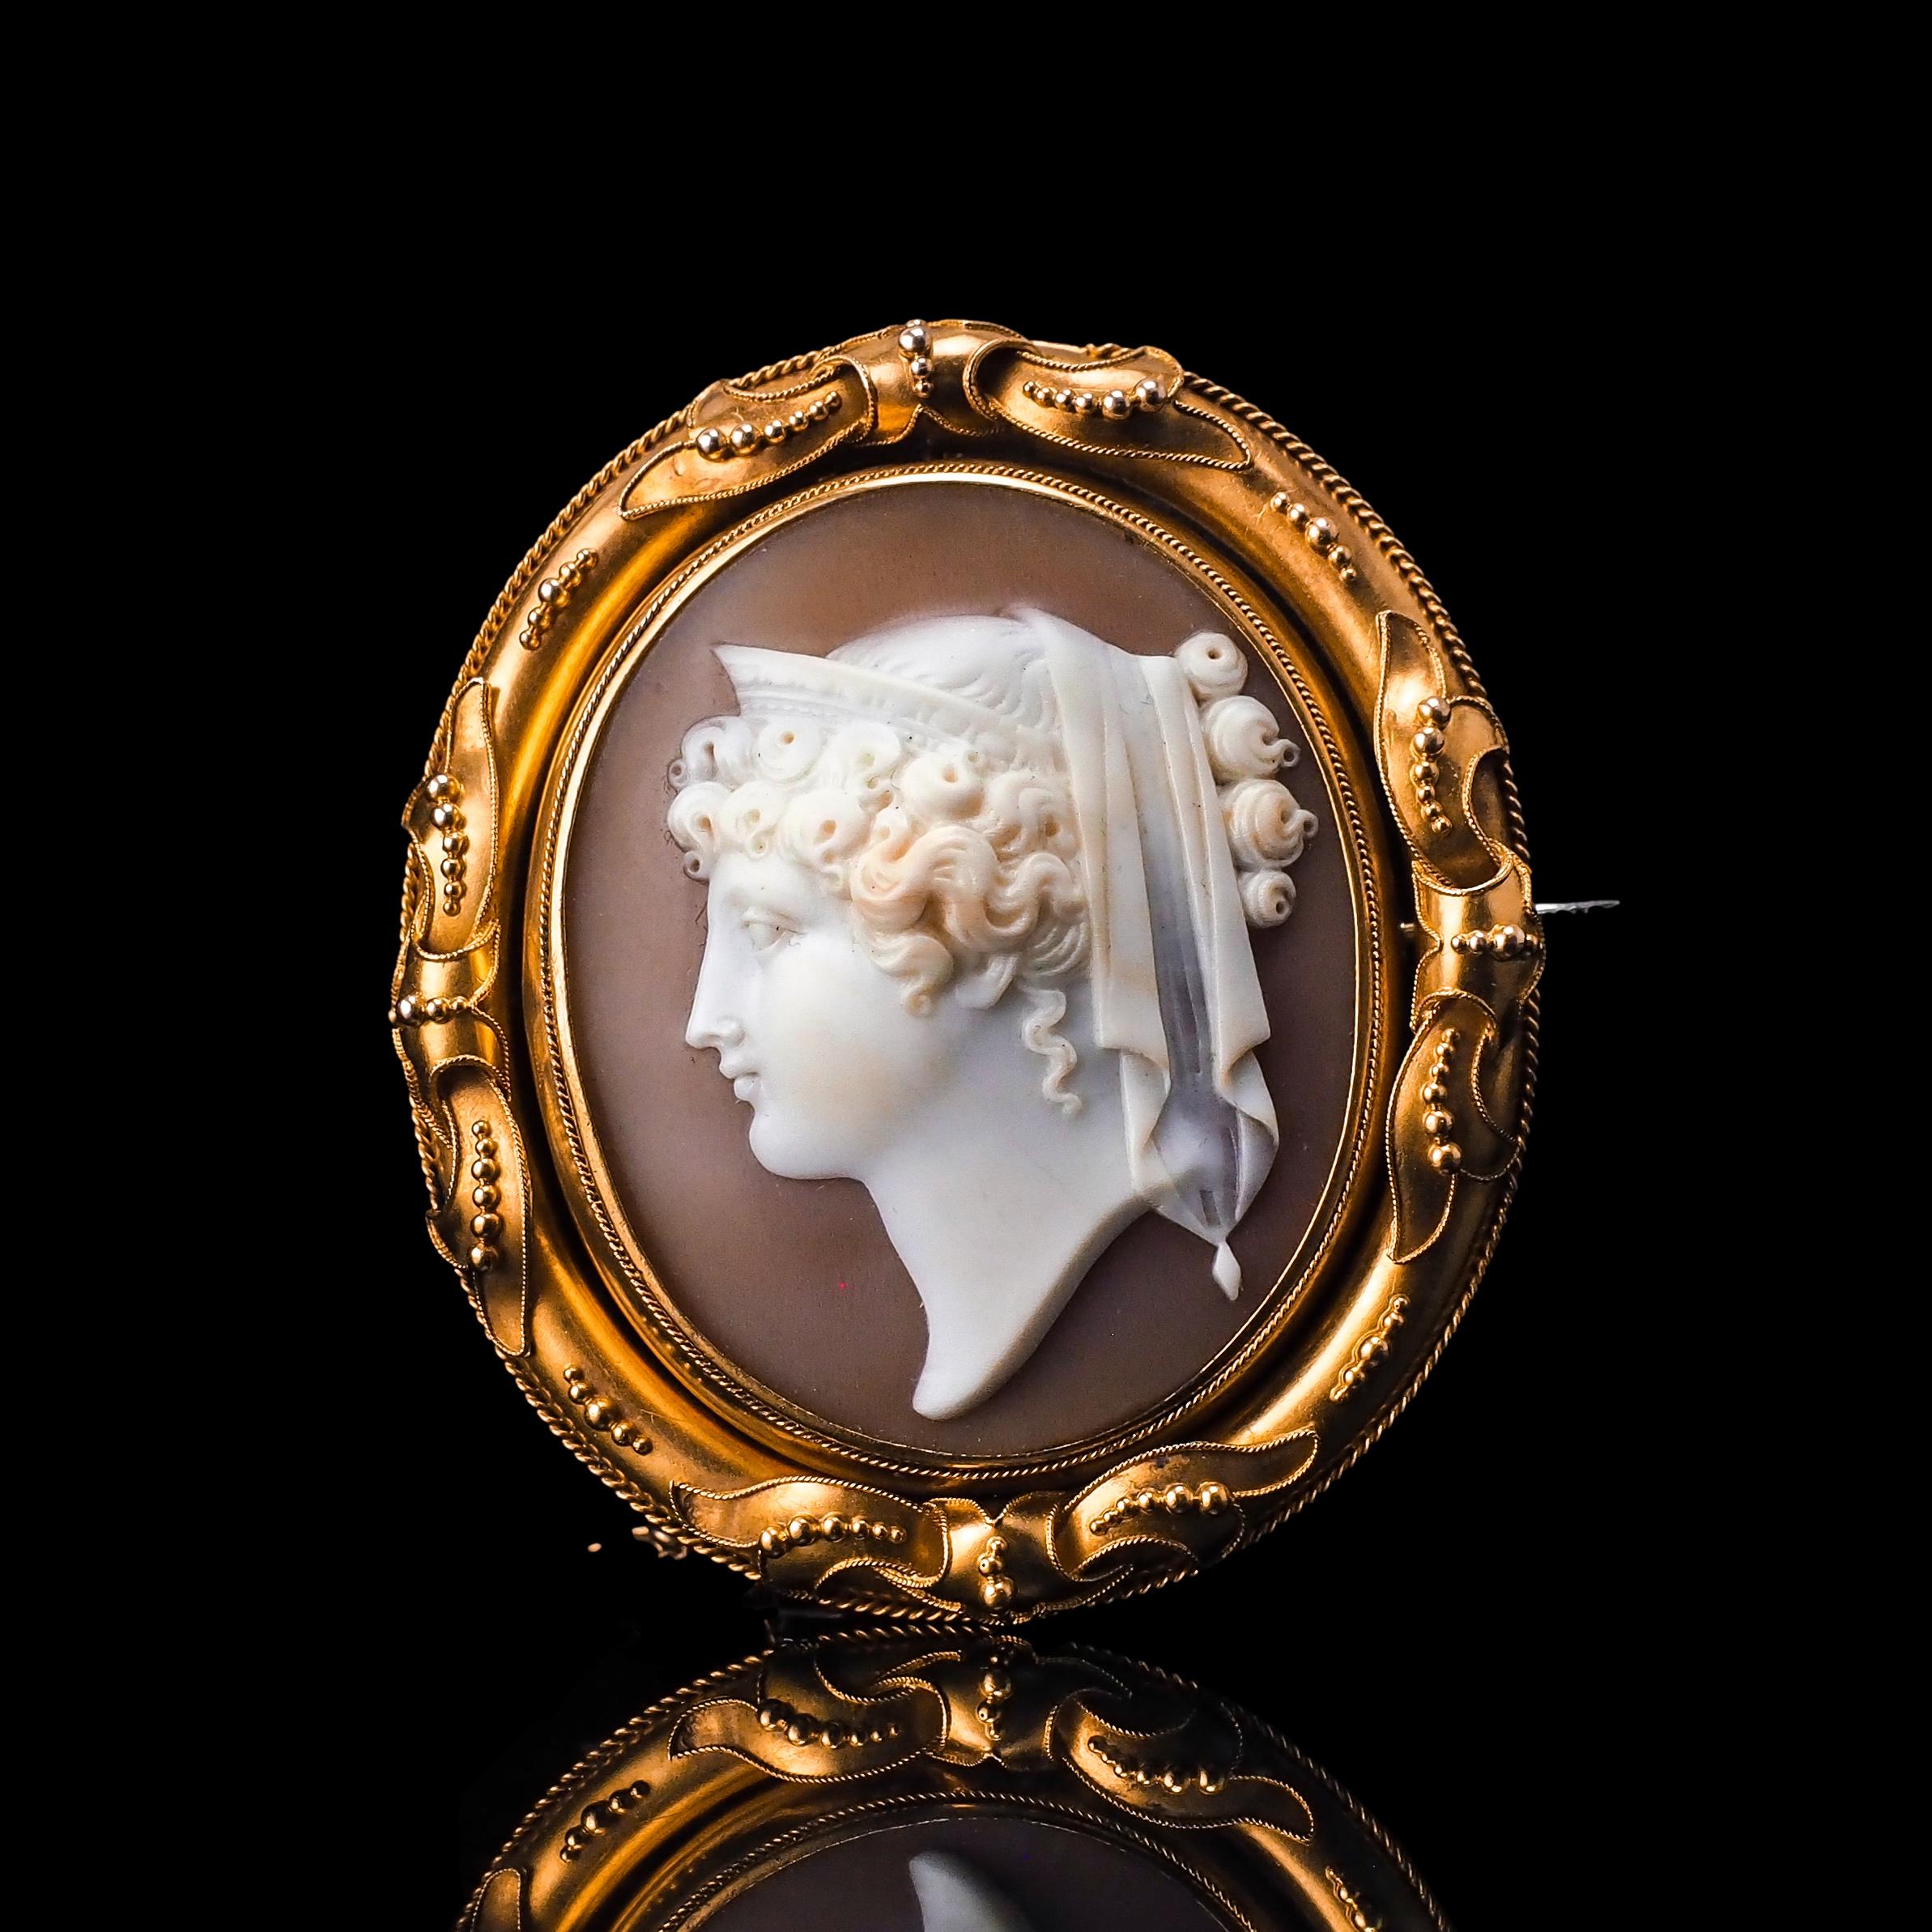 Welcome to Artisan Antiques based in Mayfair, London - We are delighted to offer this magnificent large antique 18ct gold shell cameo brooch/pendant locket made c.1860, depicting a figurehead of Hera - a Greek mythological goddess of women, marriage